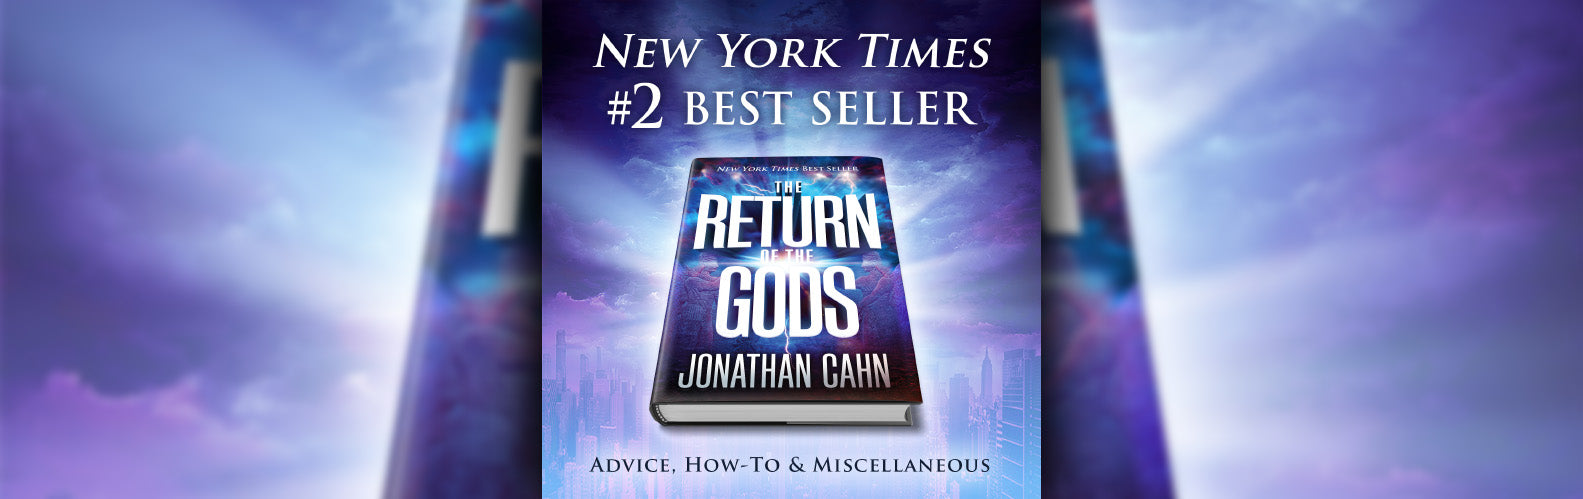 #2 New York Times bestseller!  Jonathan Cahn’s breathtaking new book, ‘The Return of the Gods,’ hits top of the charts